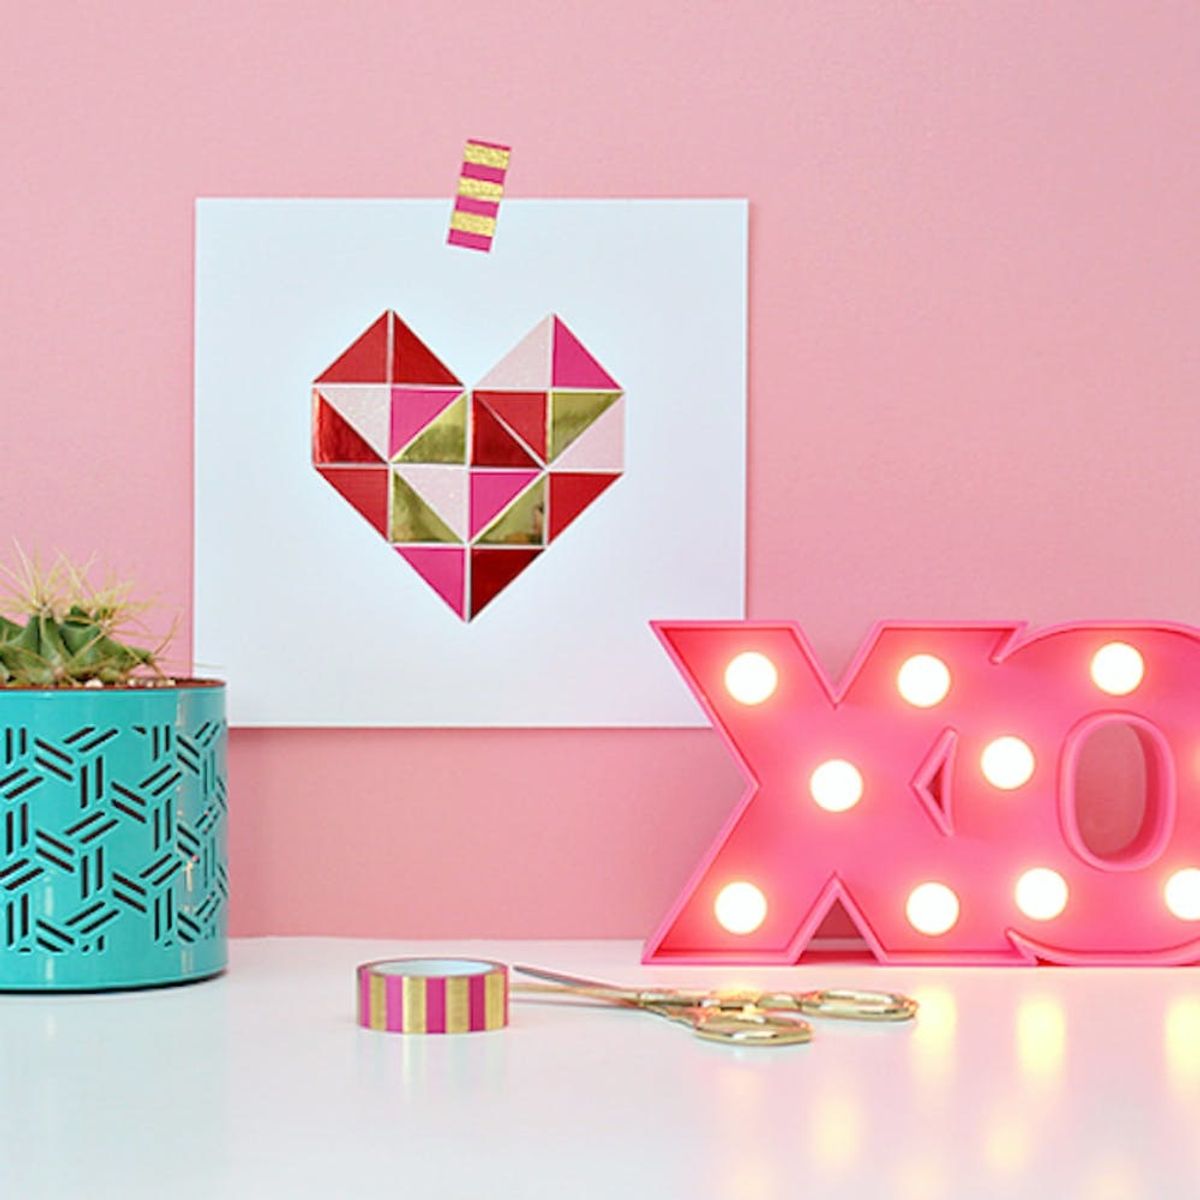 25 Valentine’s Day Wall Art Ideas You’ll Want to Leave Up All Year Long